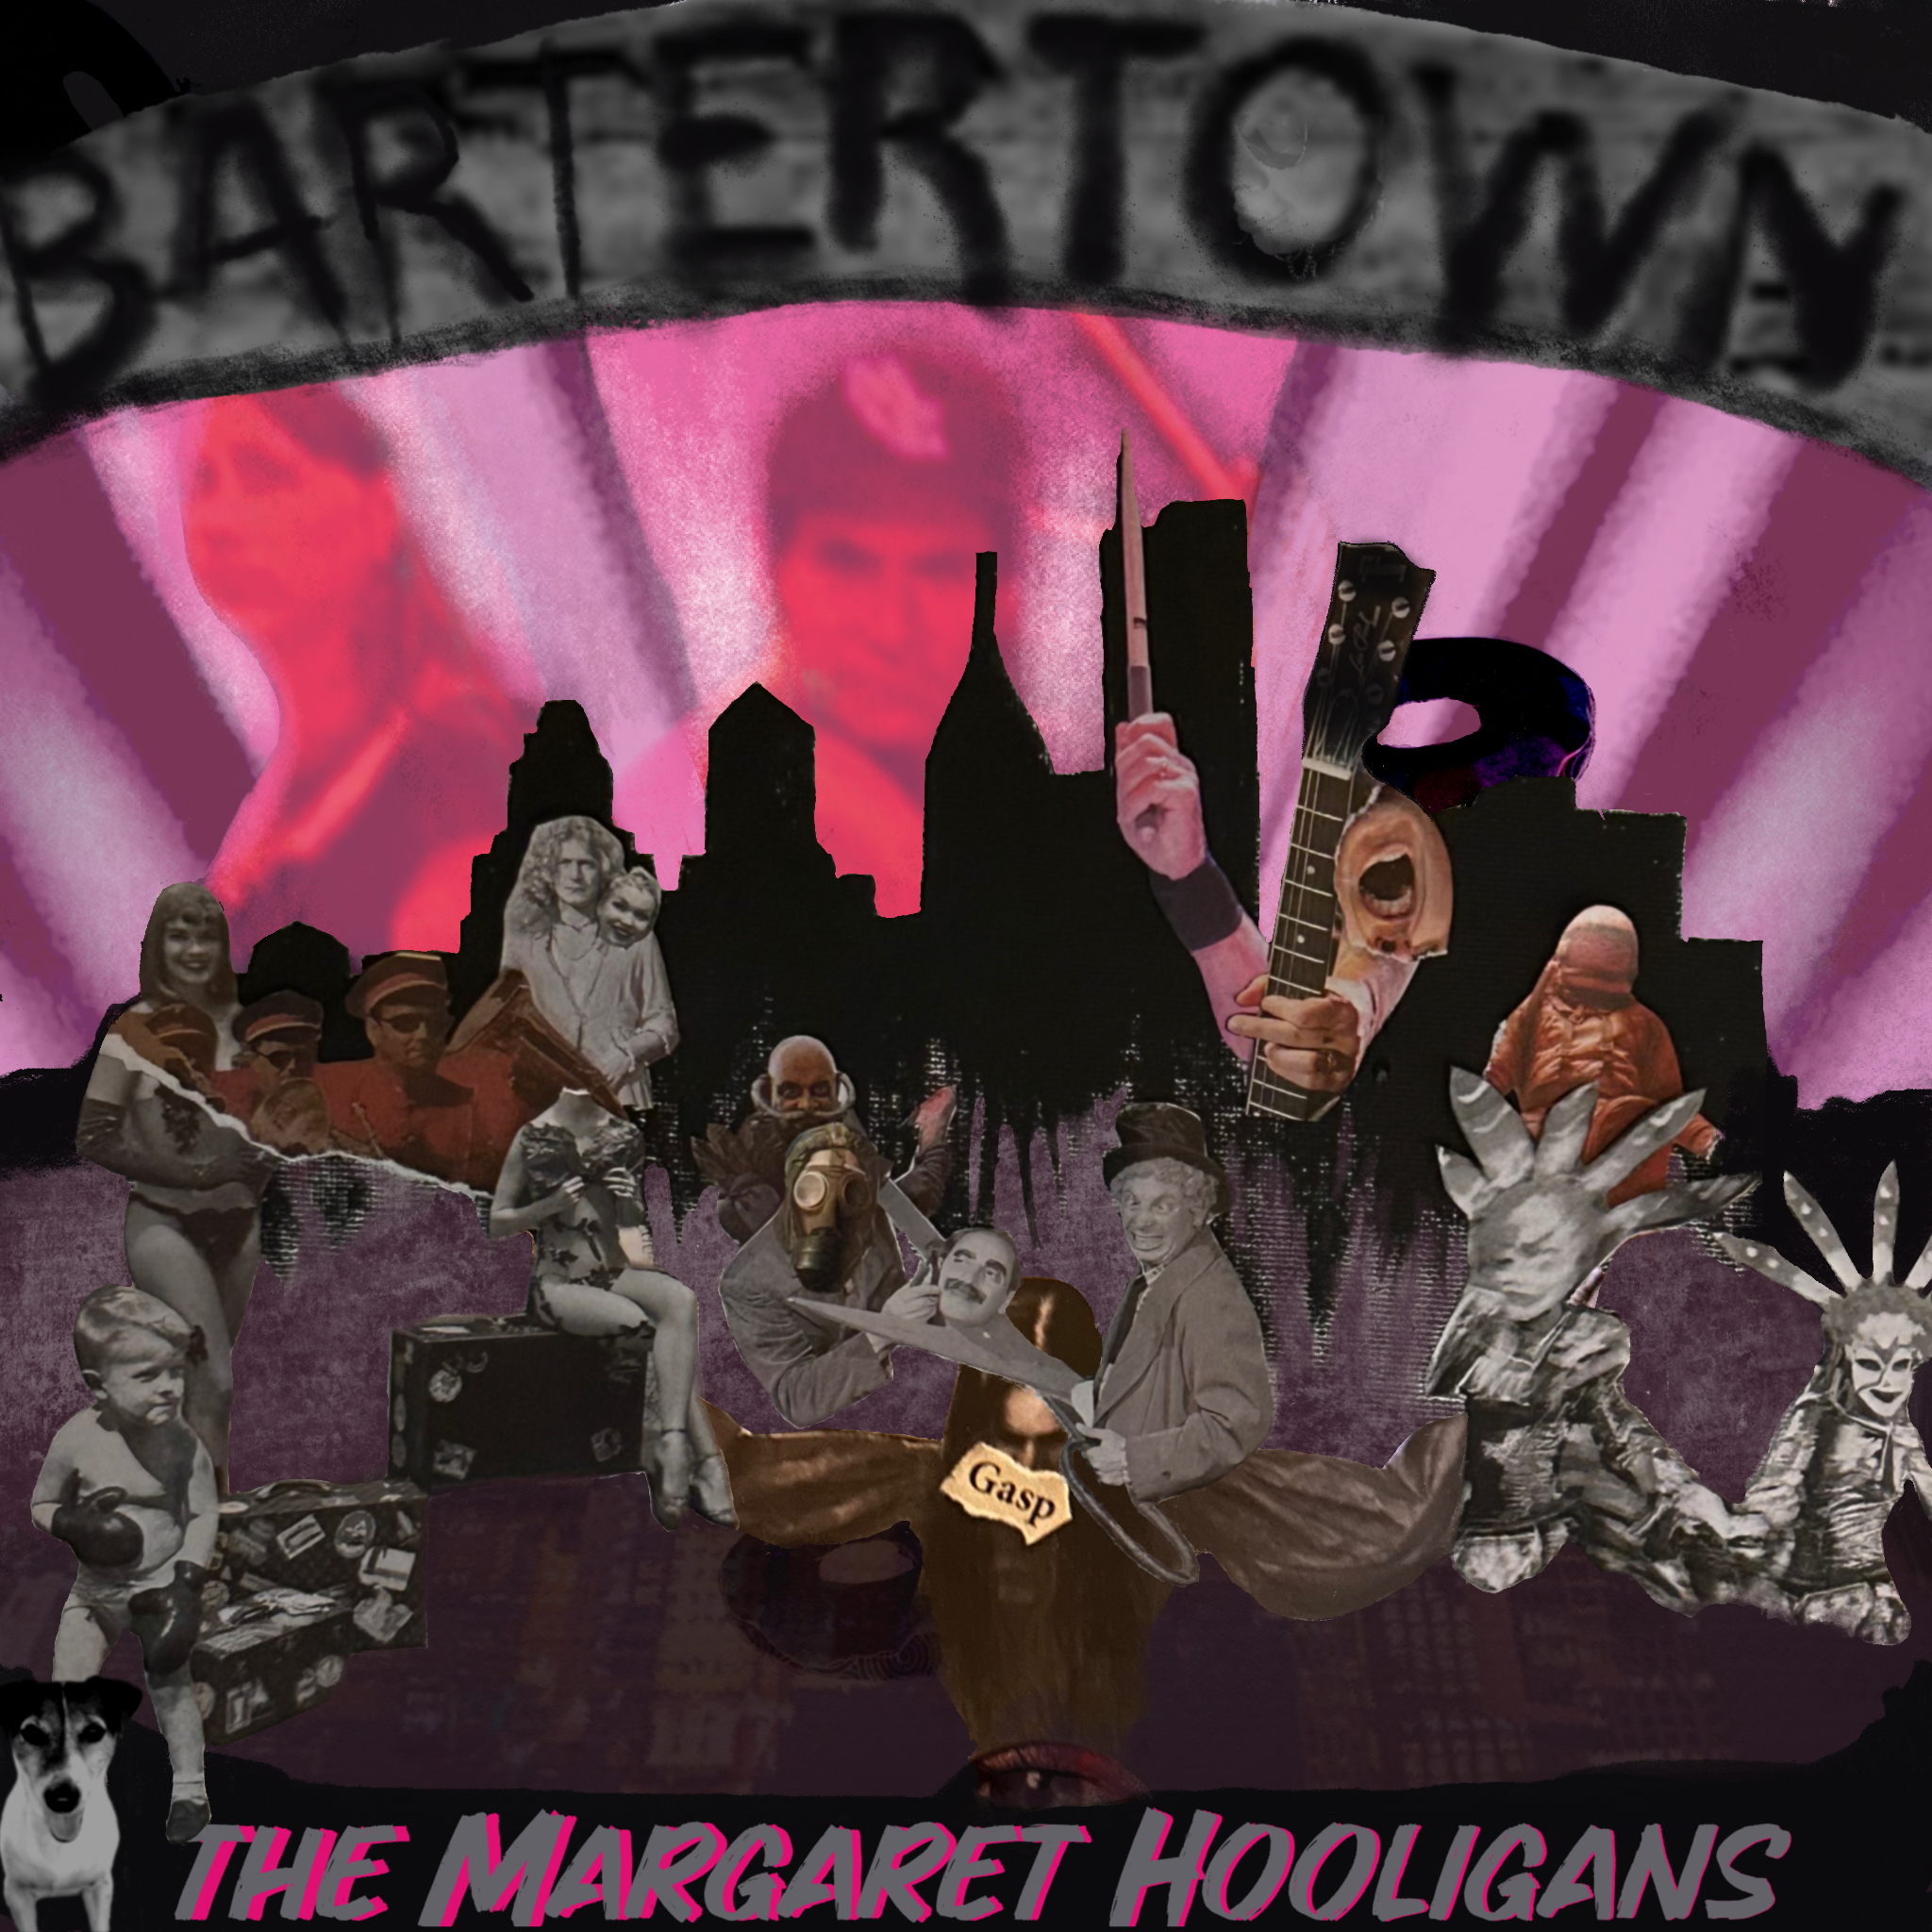 alt="The Margaret Hooligans - Saturday Night in Bartertown (2023, Piety Street Publishing) COVER"